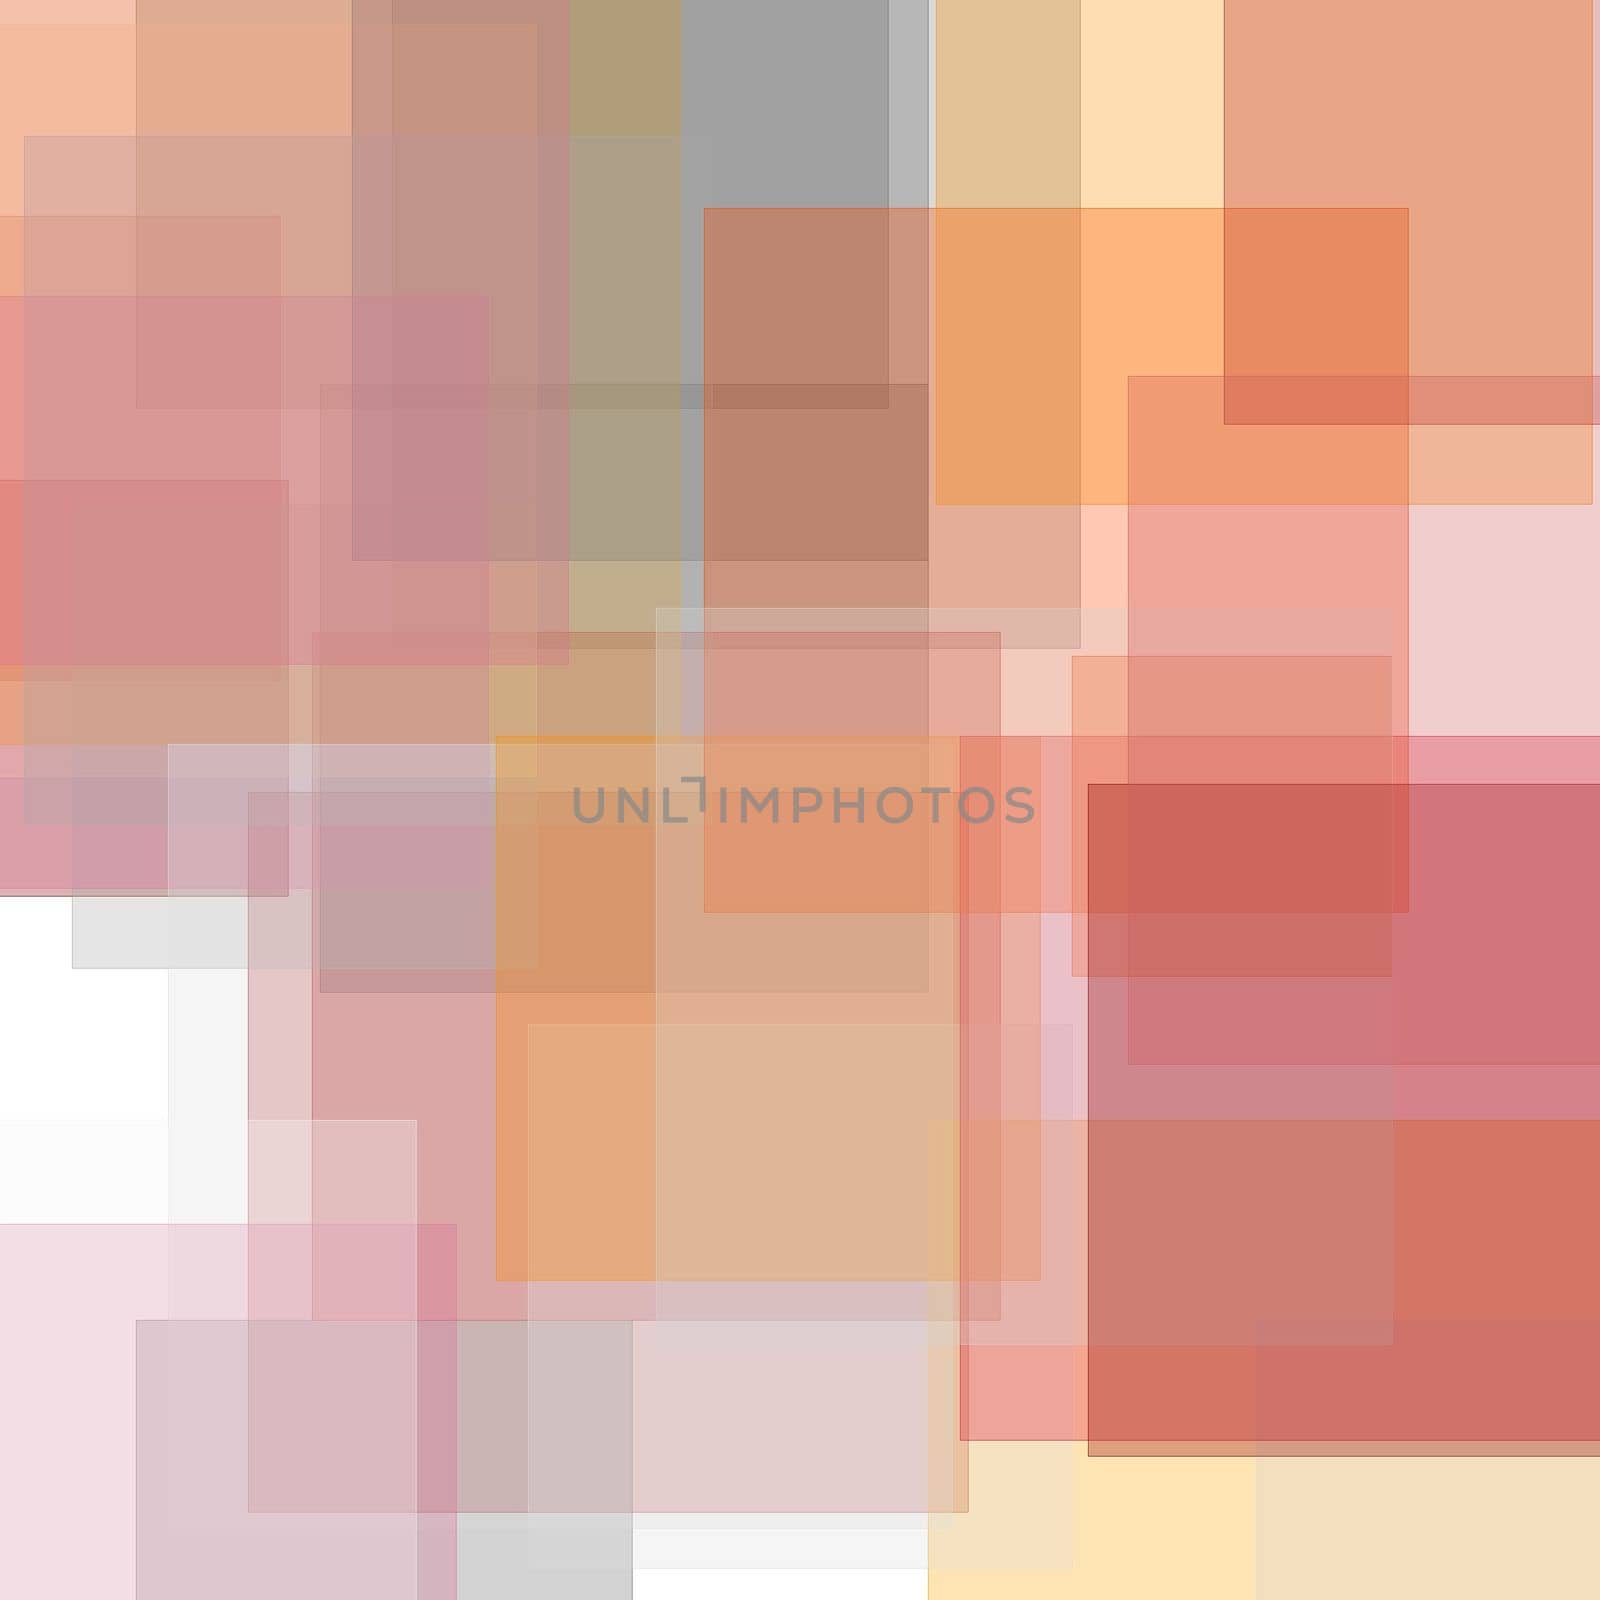 Abstract minimalist red grey orange illustration with squares useful as a background